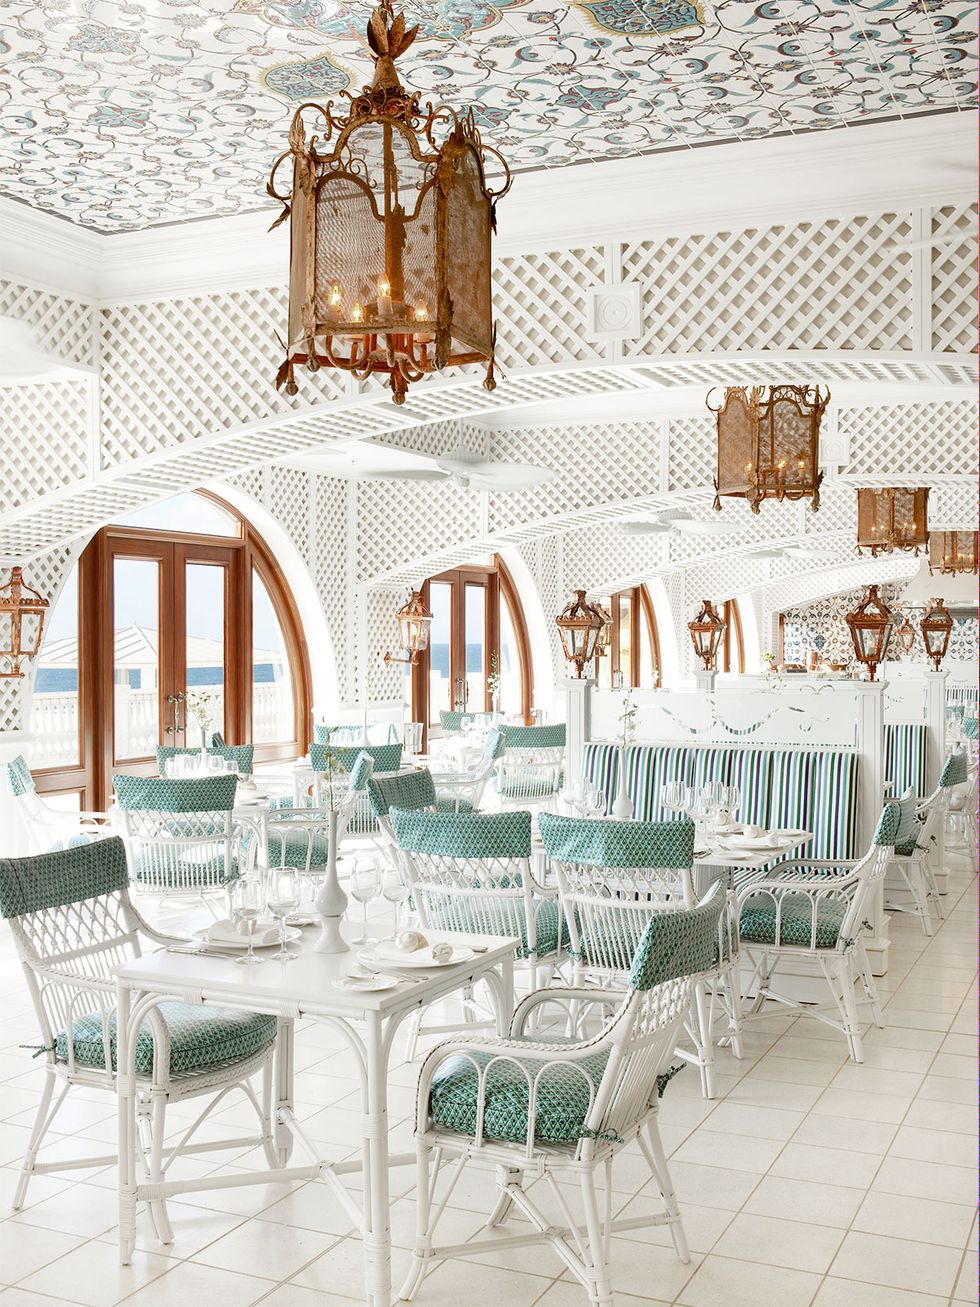 Furniture, Table, Teal, Chandelier, Turquoise, Linens, Aqua, Tablecloth, Light fixture, Home accessories, 